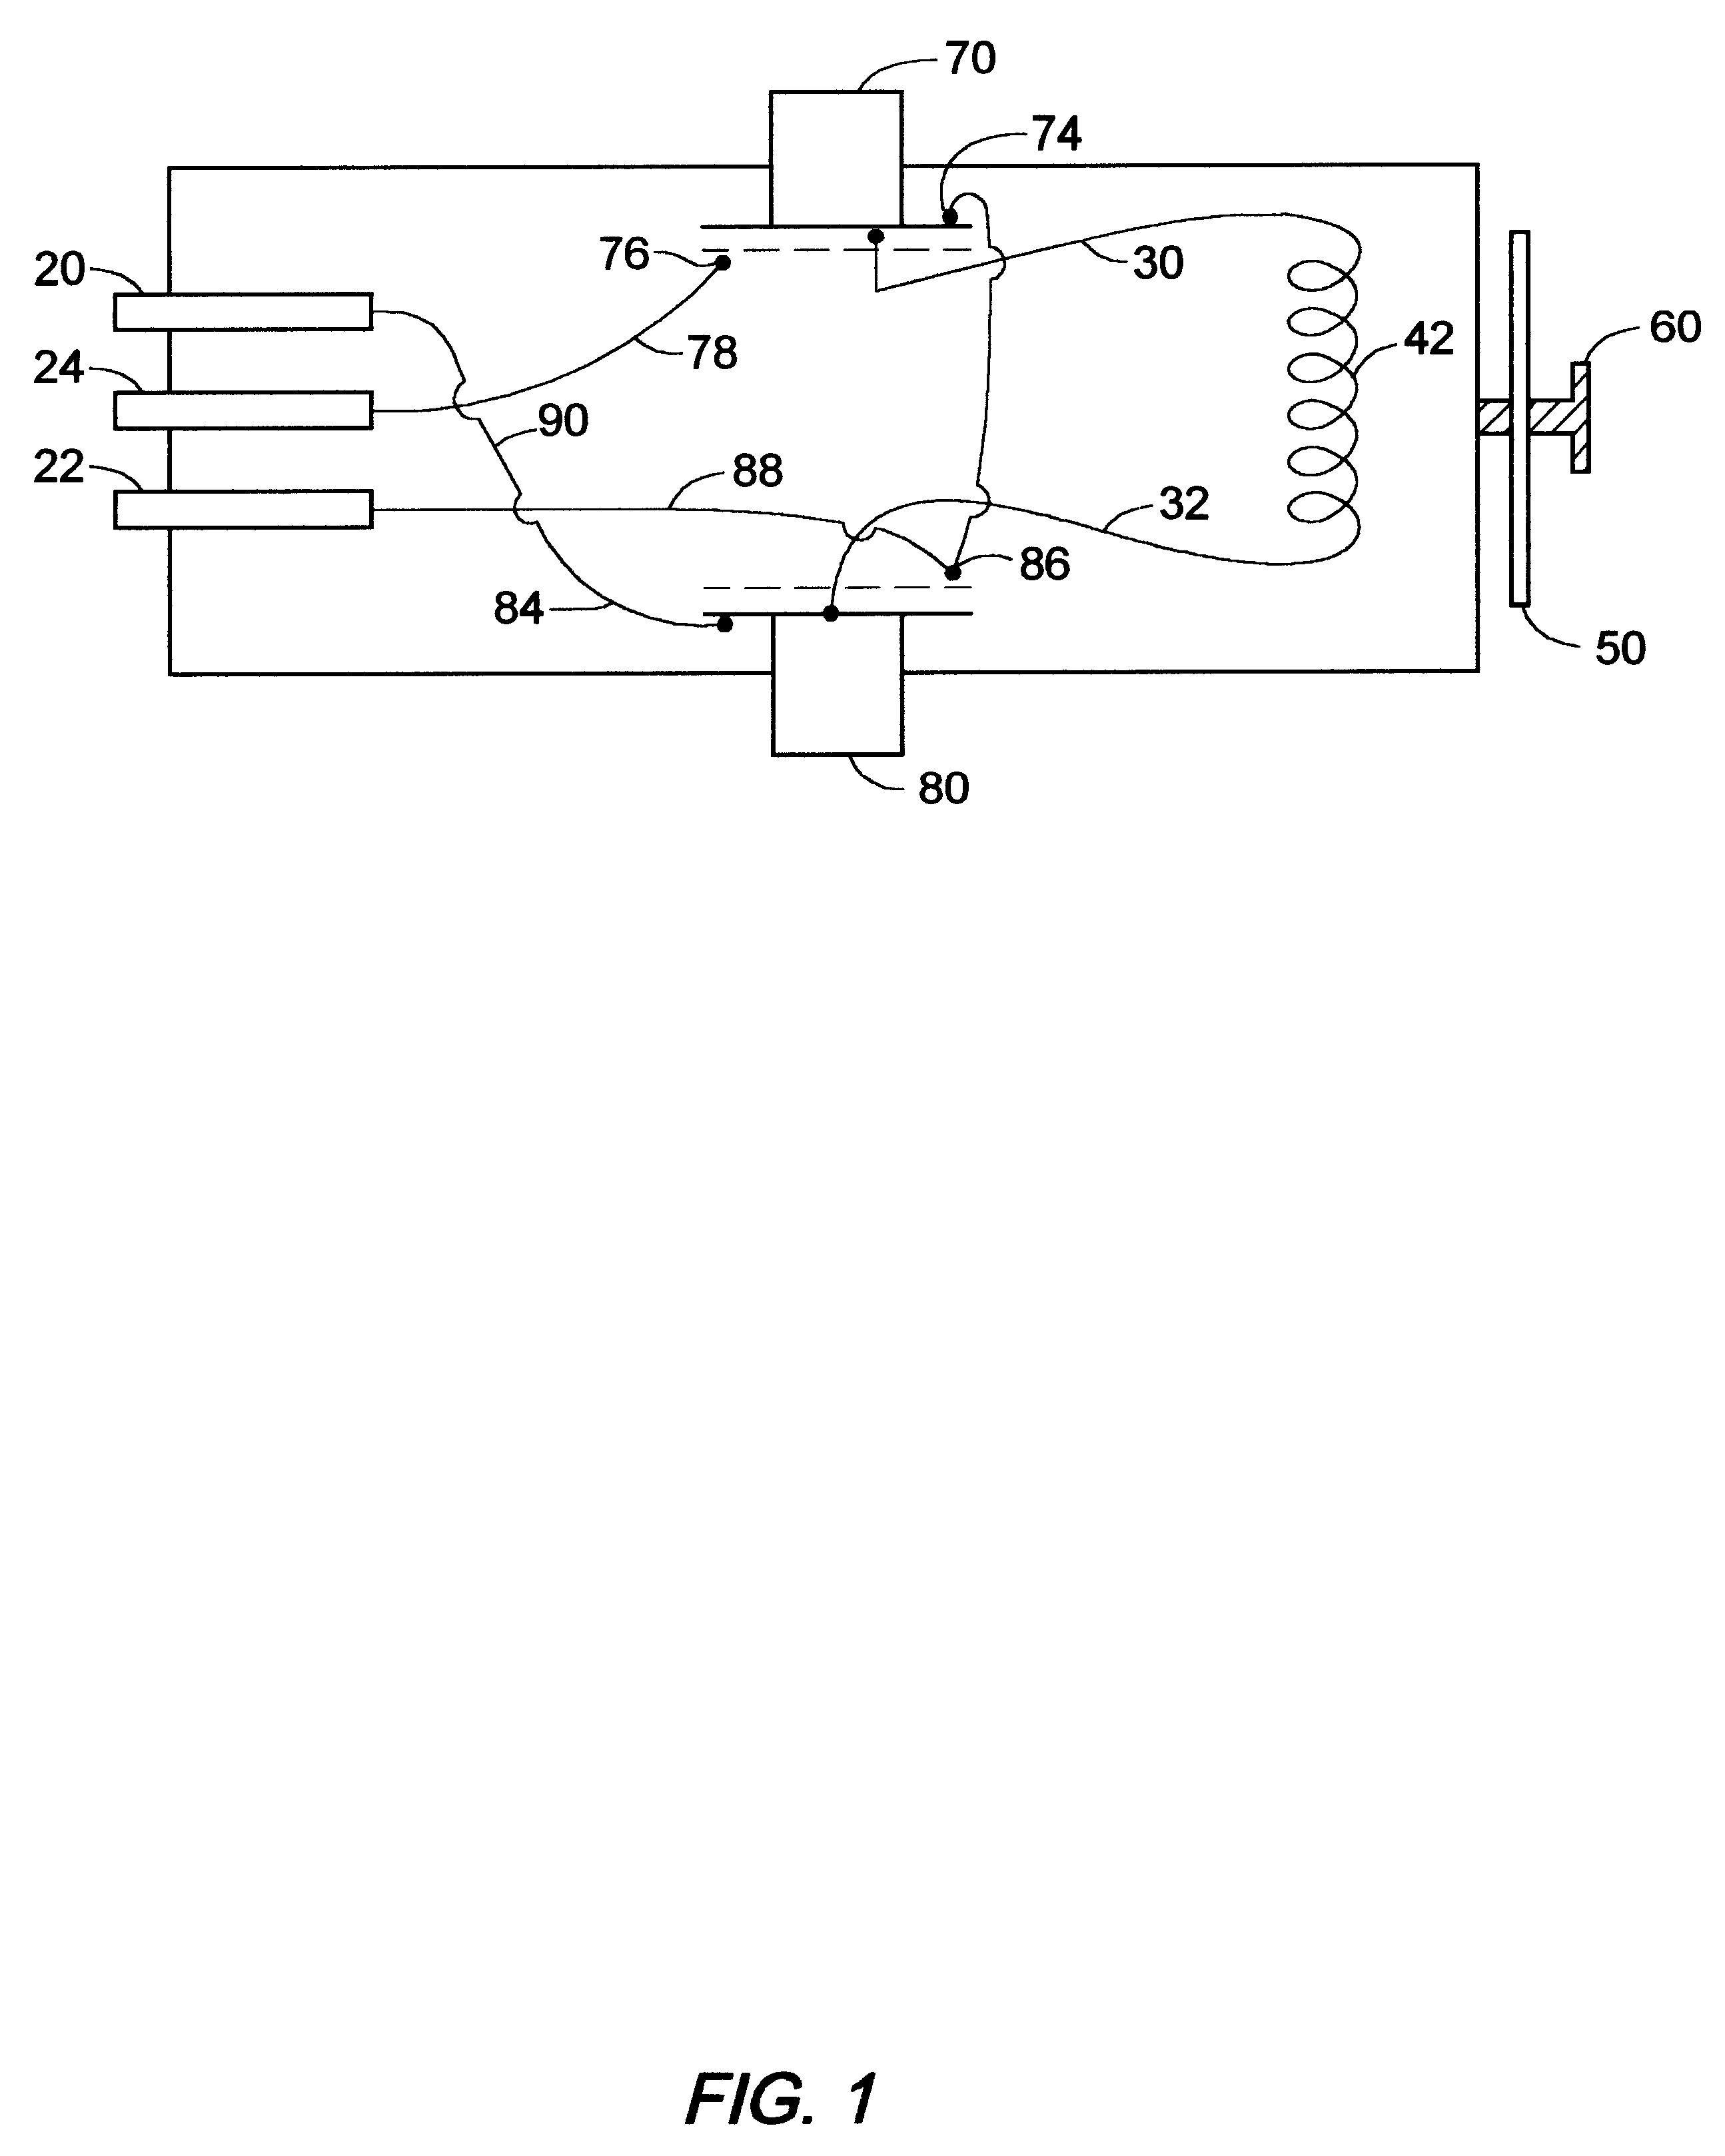 Apparatus for detecting a completed electrical circuit, reverse polarity, ground and ground fault interrupter